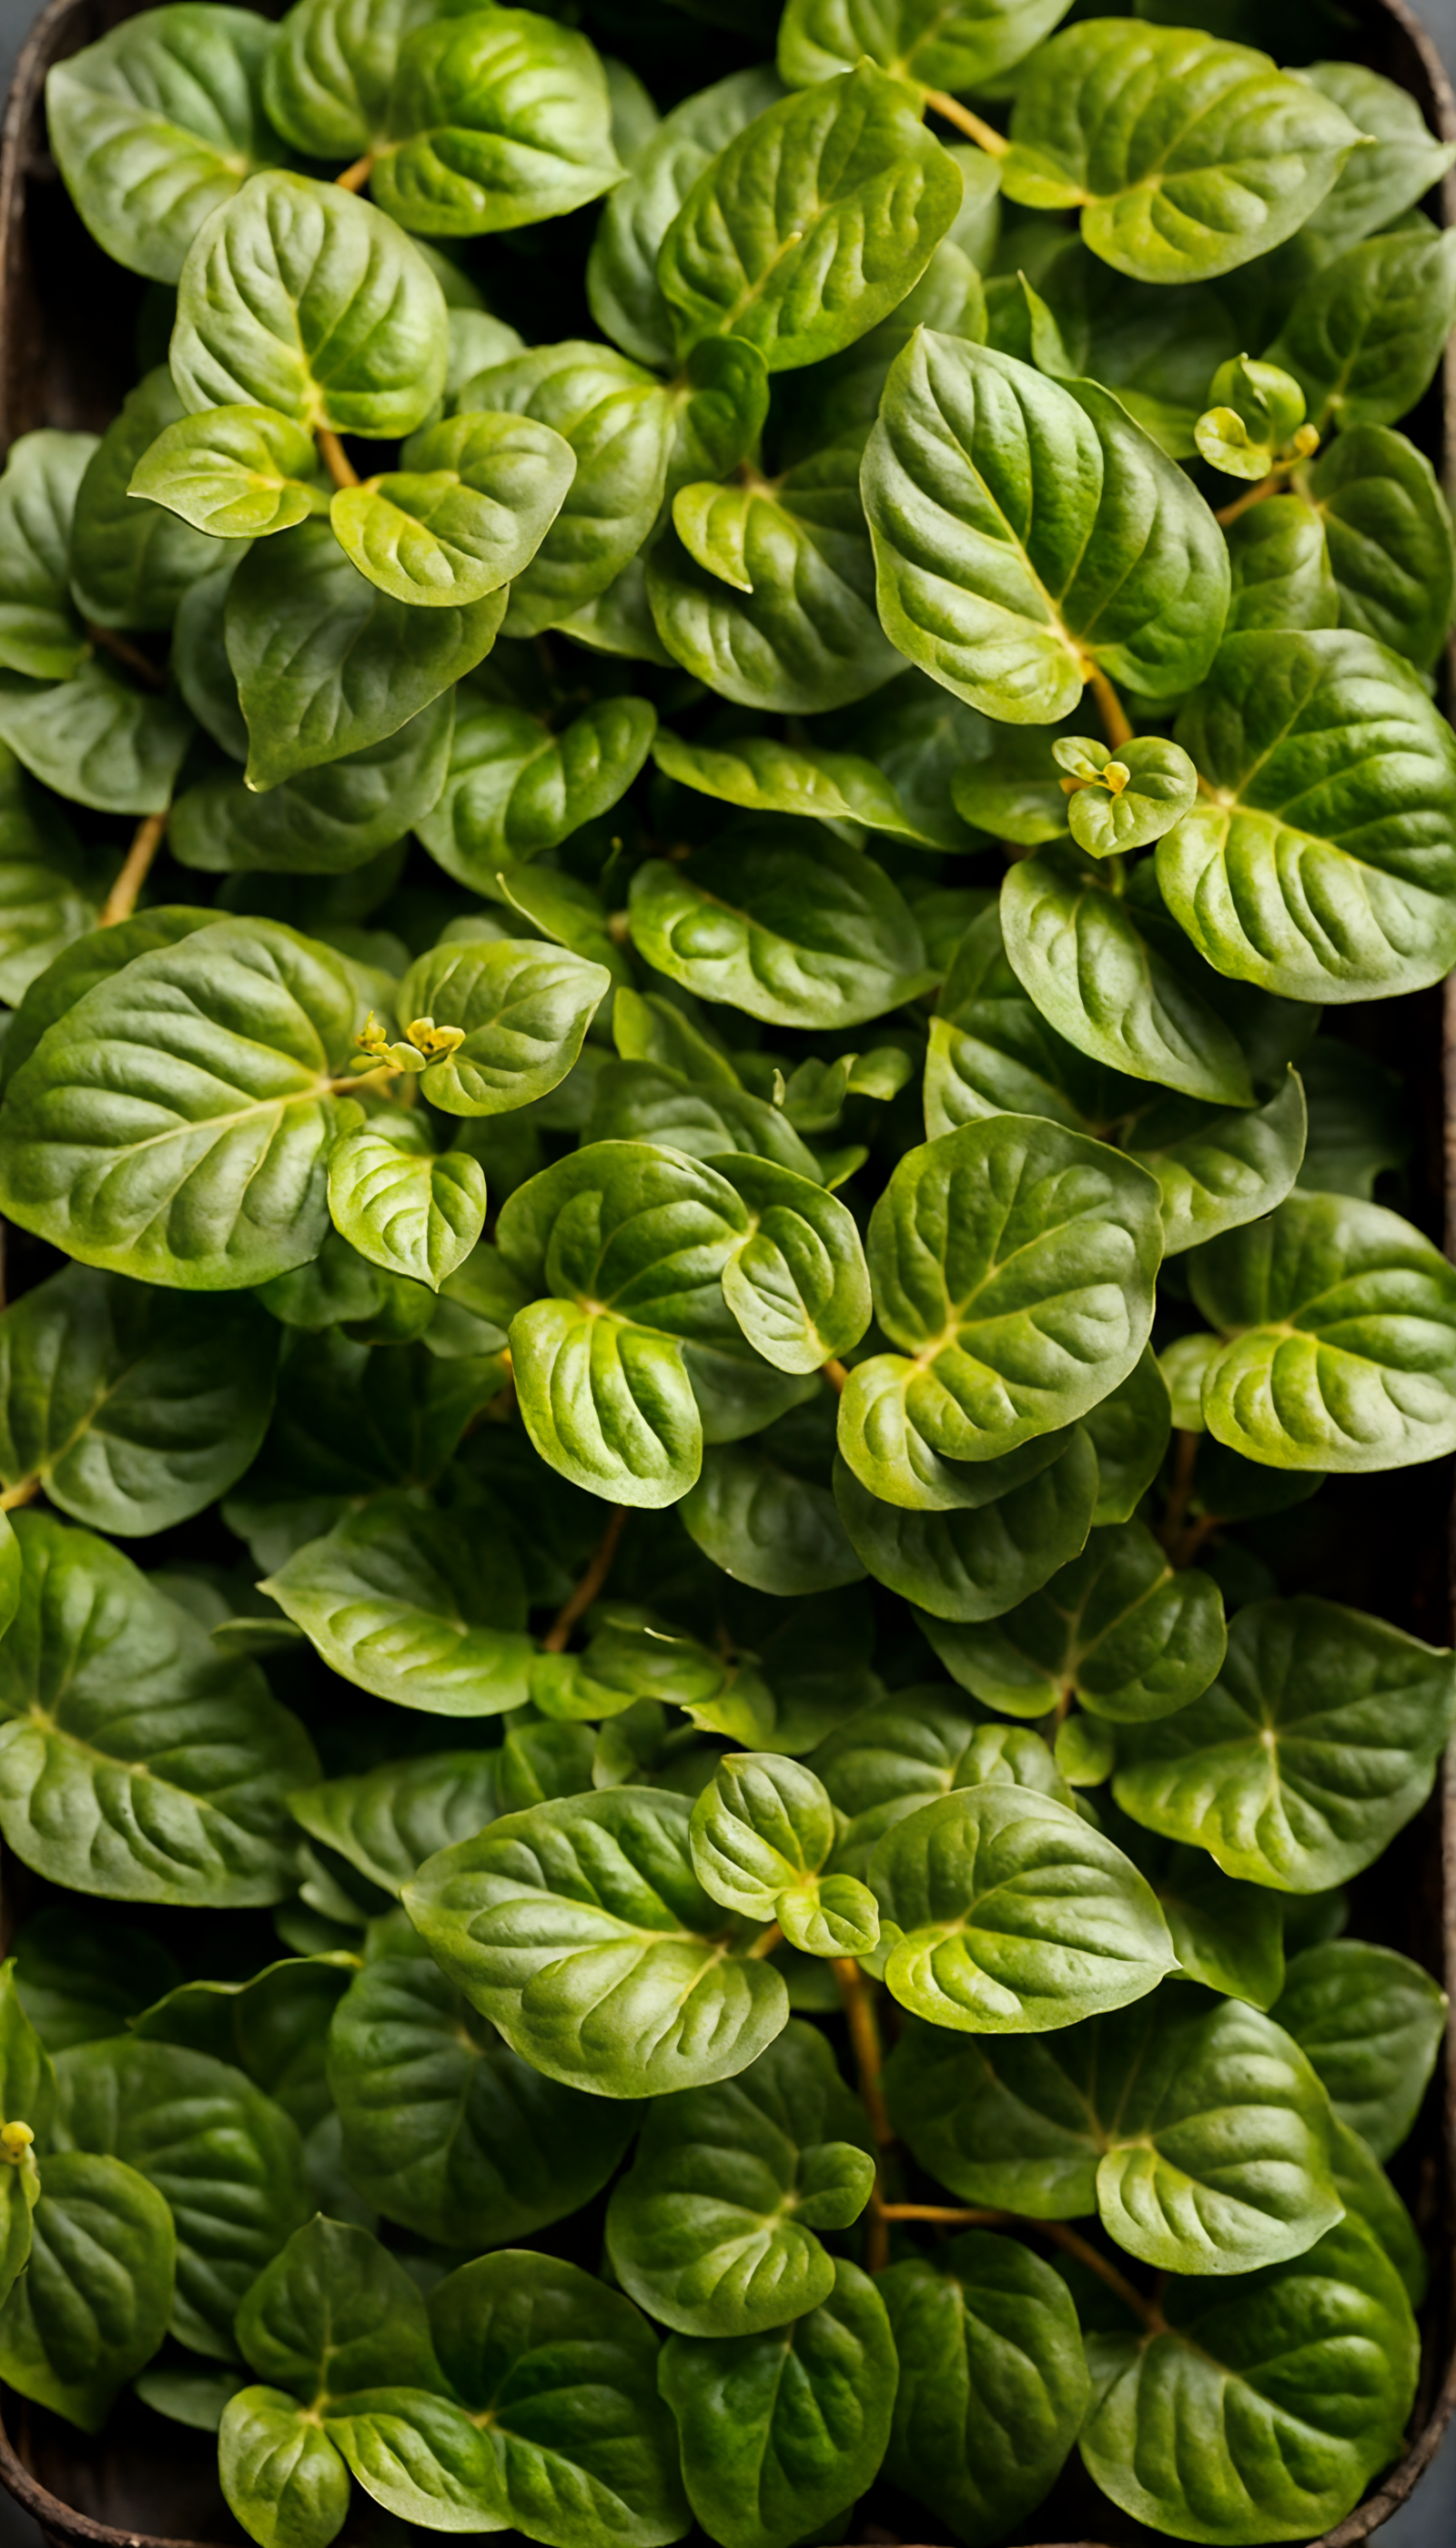 Lysimachia nummularia (Creeping Jenny) with vibrant green leaves in a bowl planter, clear lighting, dark background.